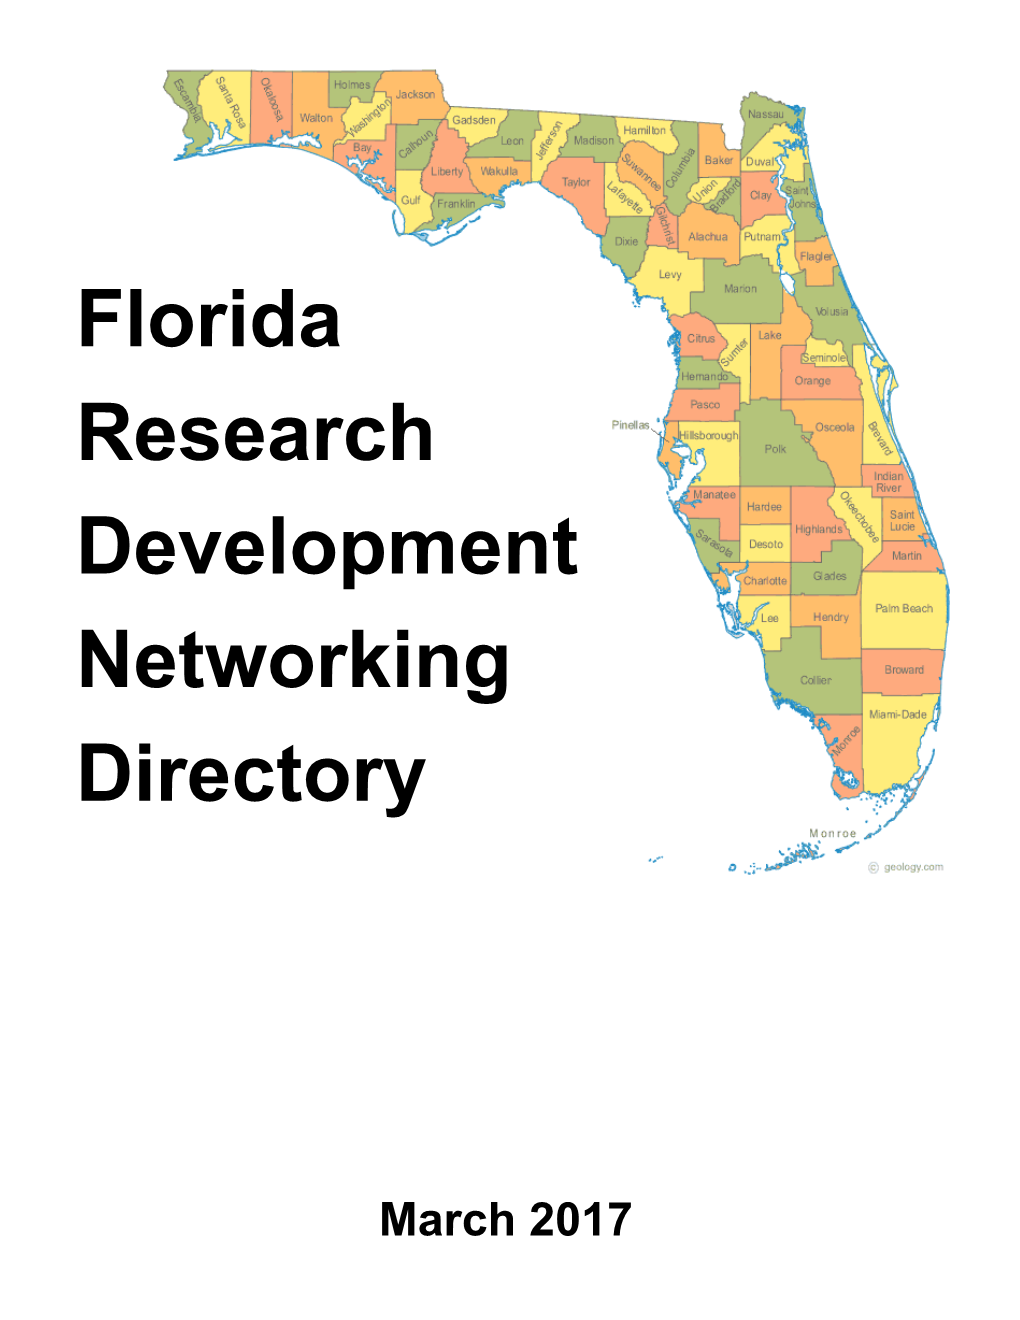 Florida Research Development Networking Directory